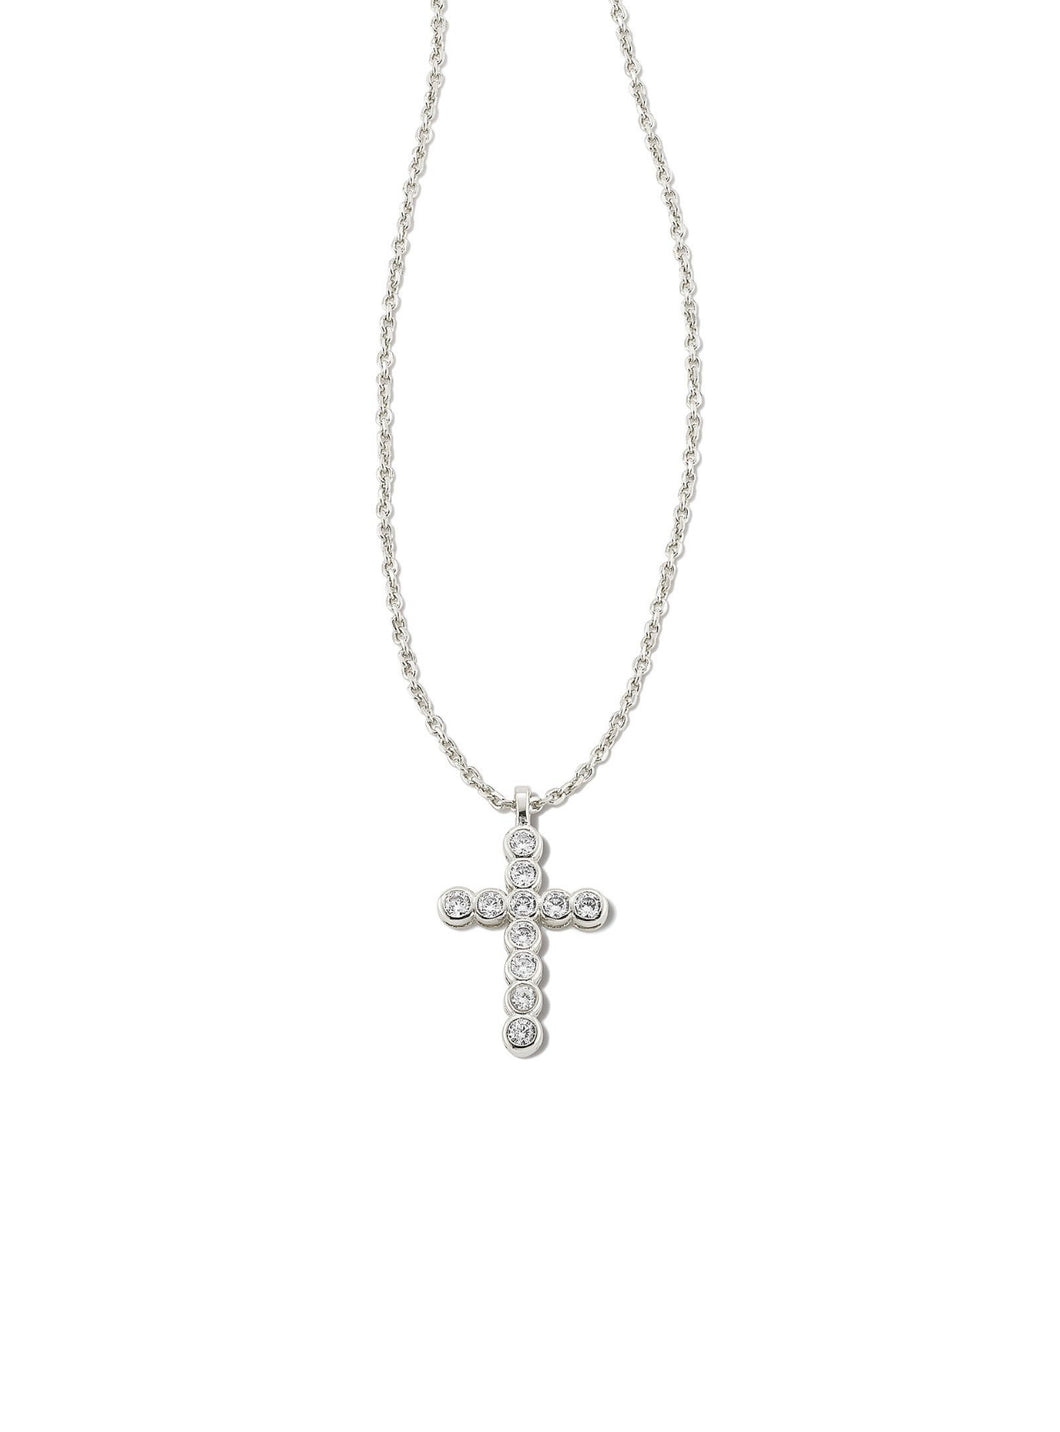 Kendra Scott: Cross Necklace in Silver White Crystal